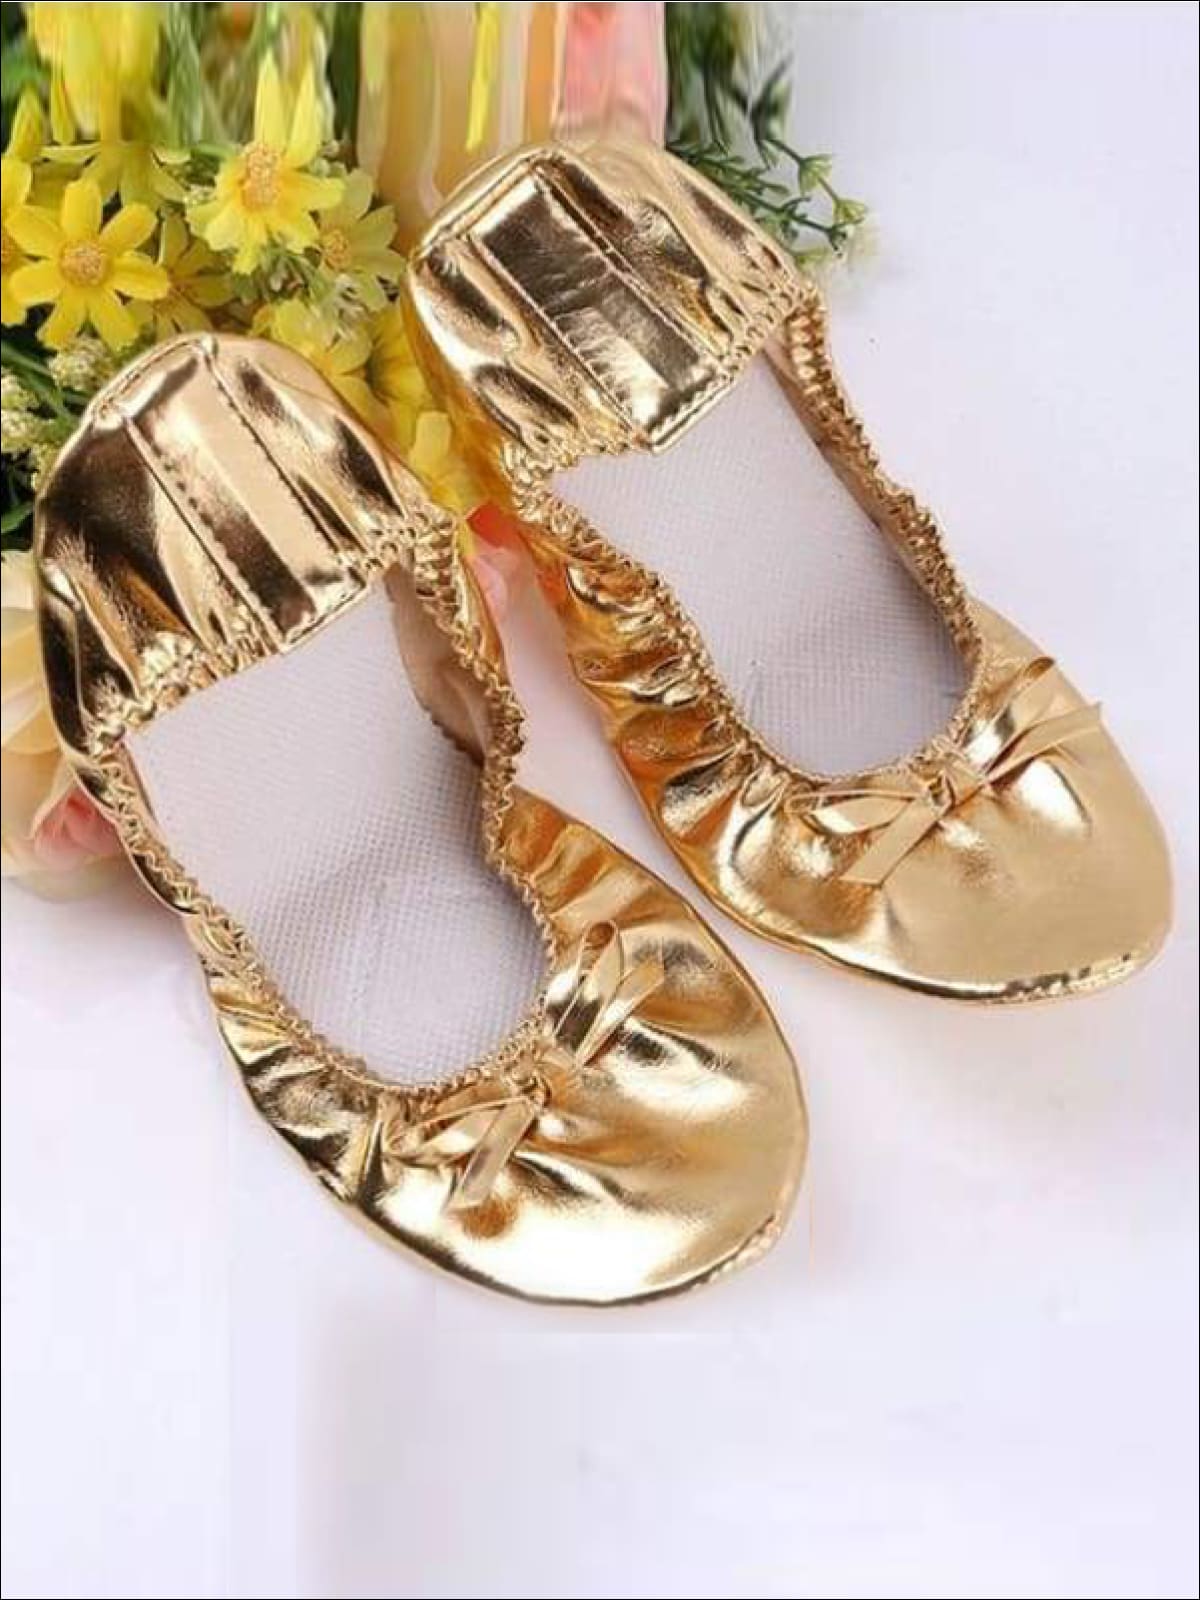 Metallic Gold Belly Dance Genie Costume Shoes - Gold / M - 4T/ 5Y - Girls Halloween Costume